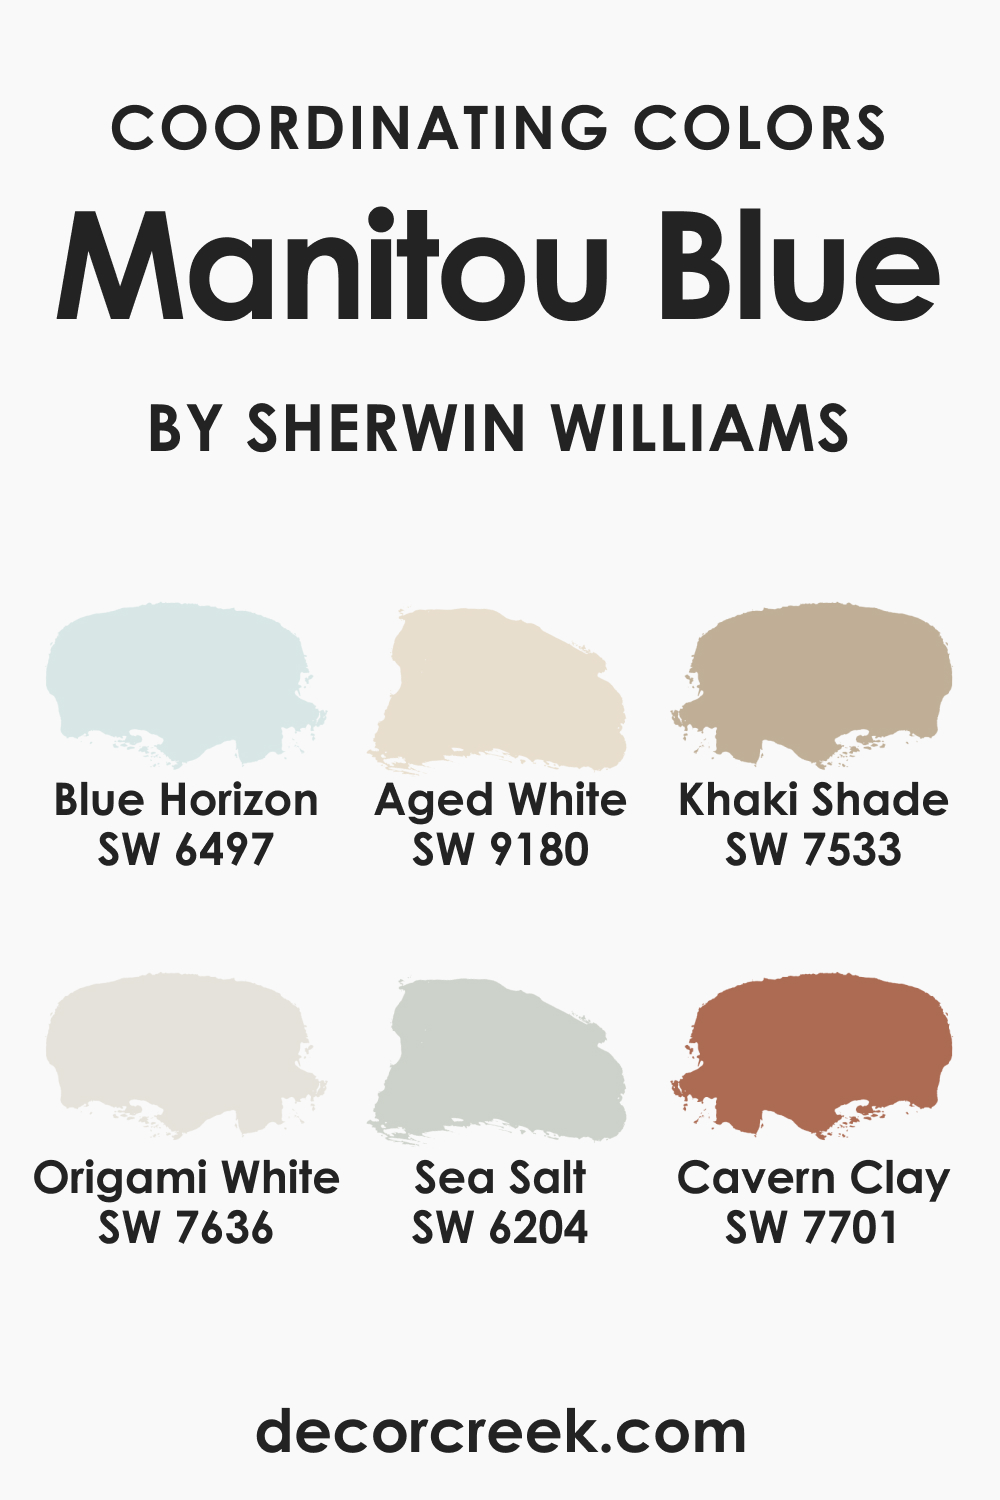 Coordinating Colors of SW 6501 Manitou Blue